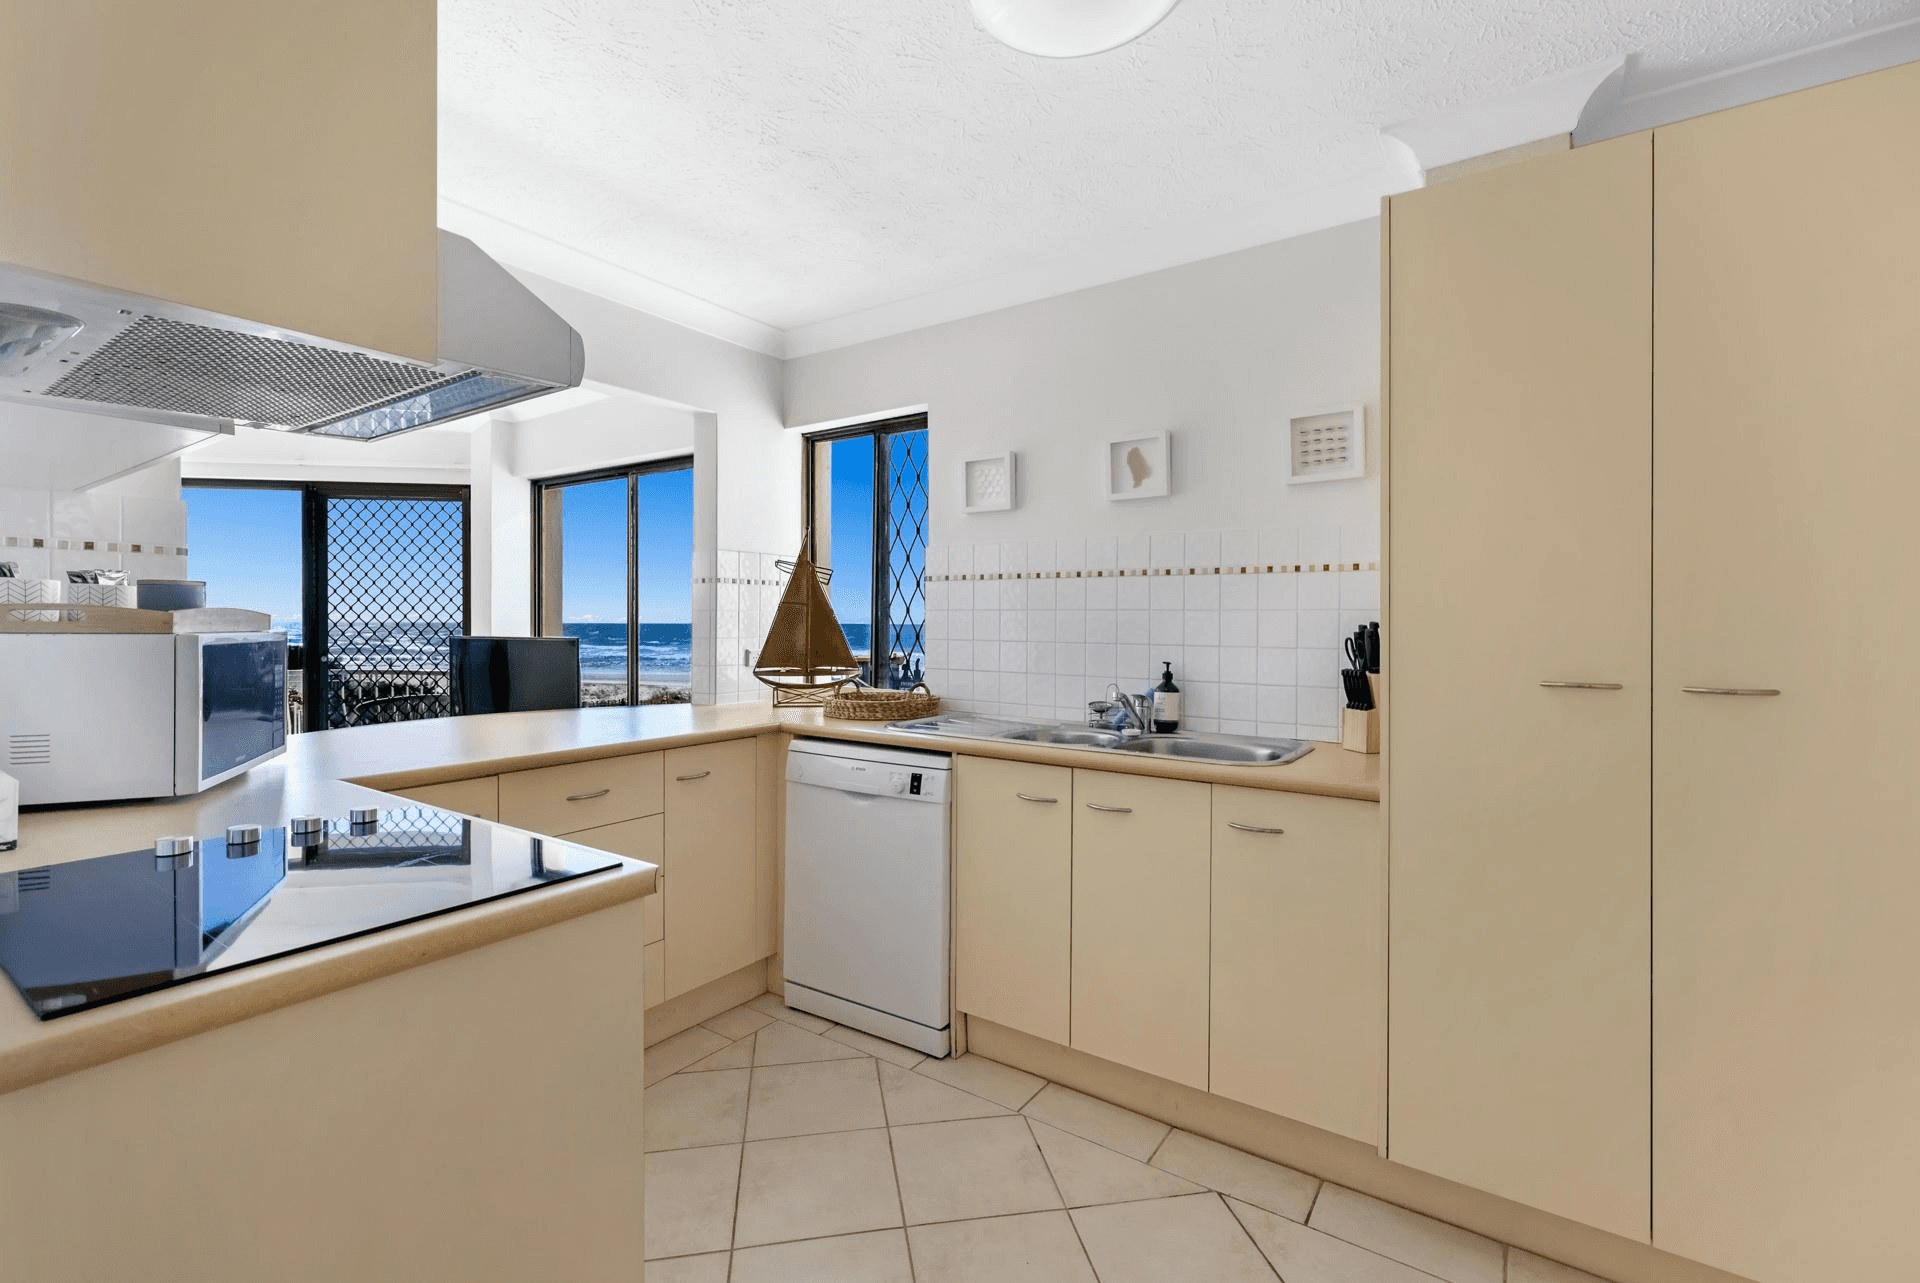 2/28 Old Burleigh Road, Surfers Paradise, QLD 4217